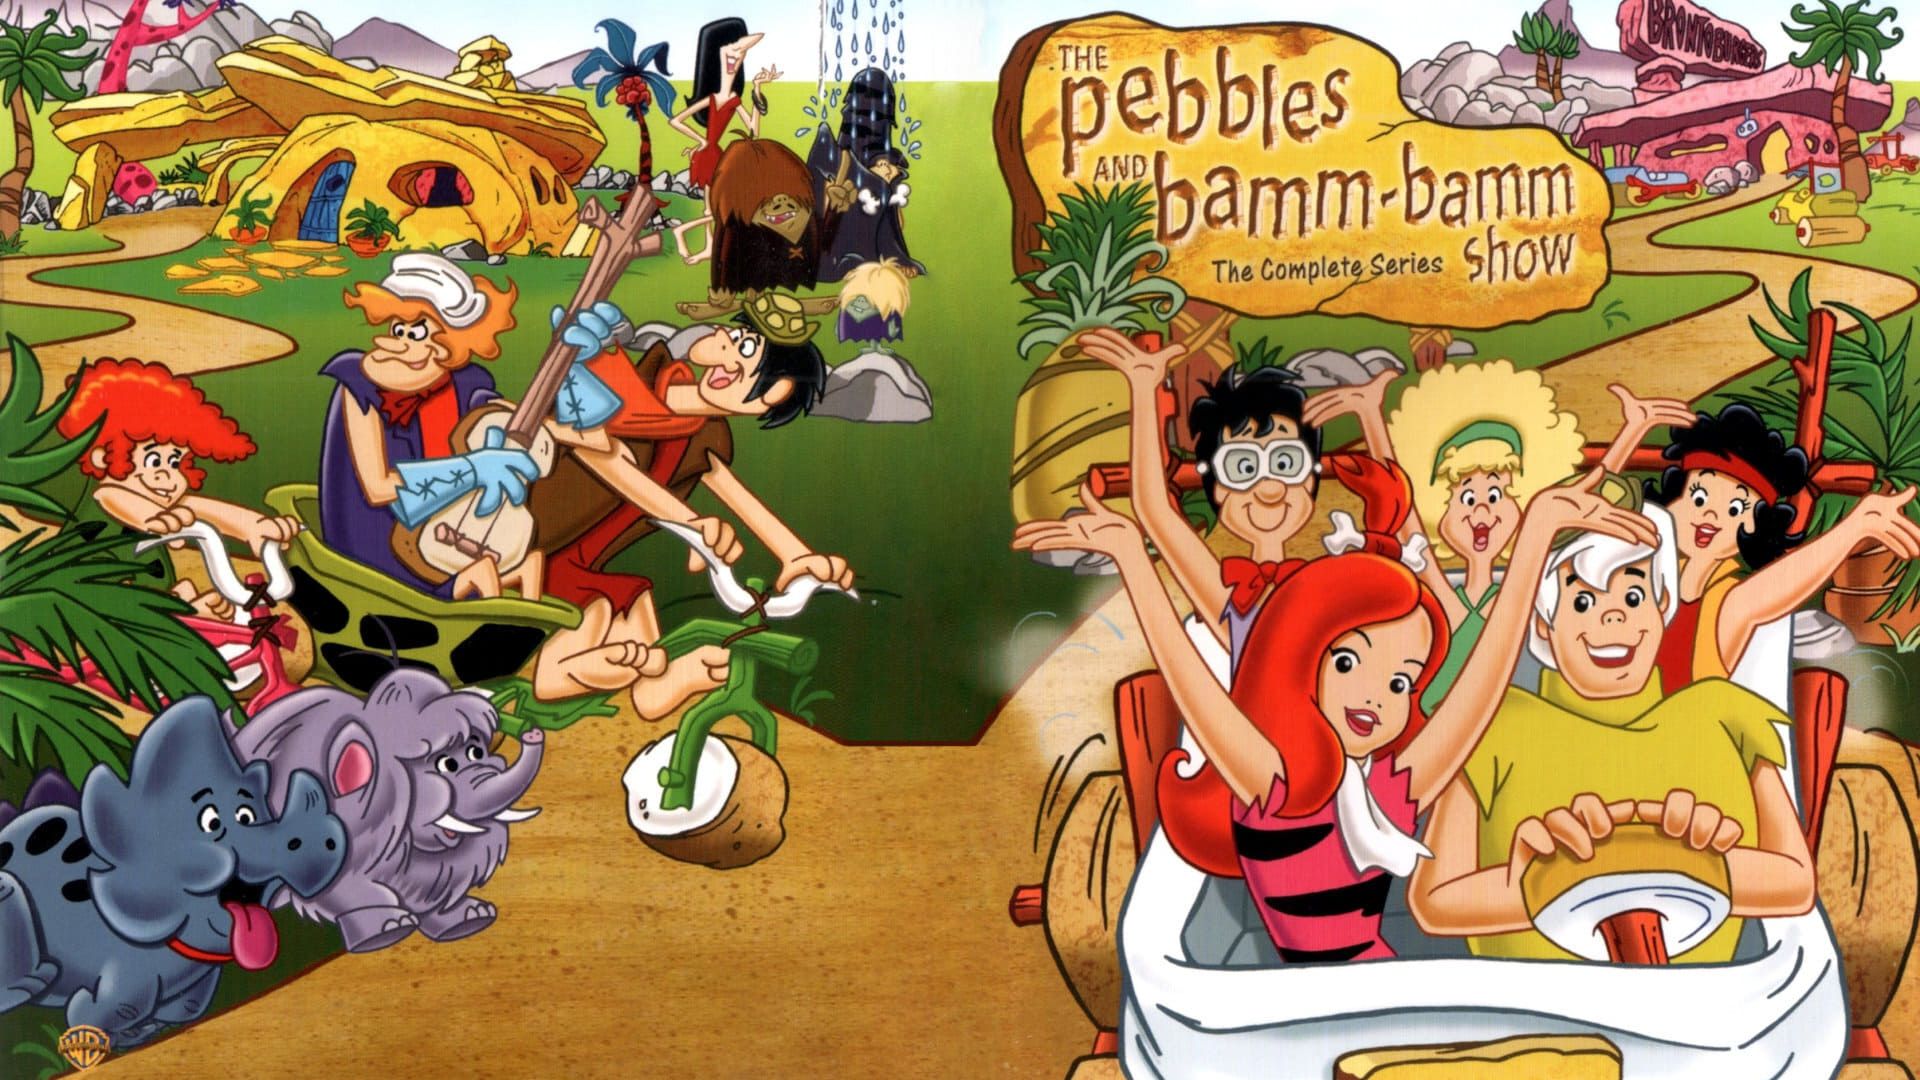 The Pebbles and Bamm-Bamm Show background